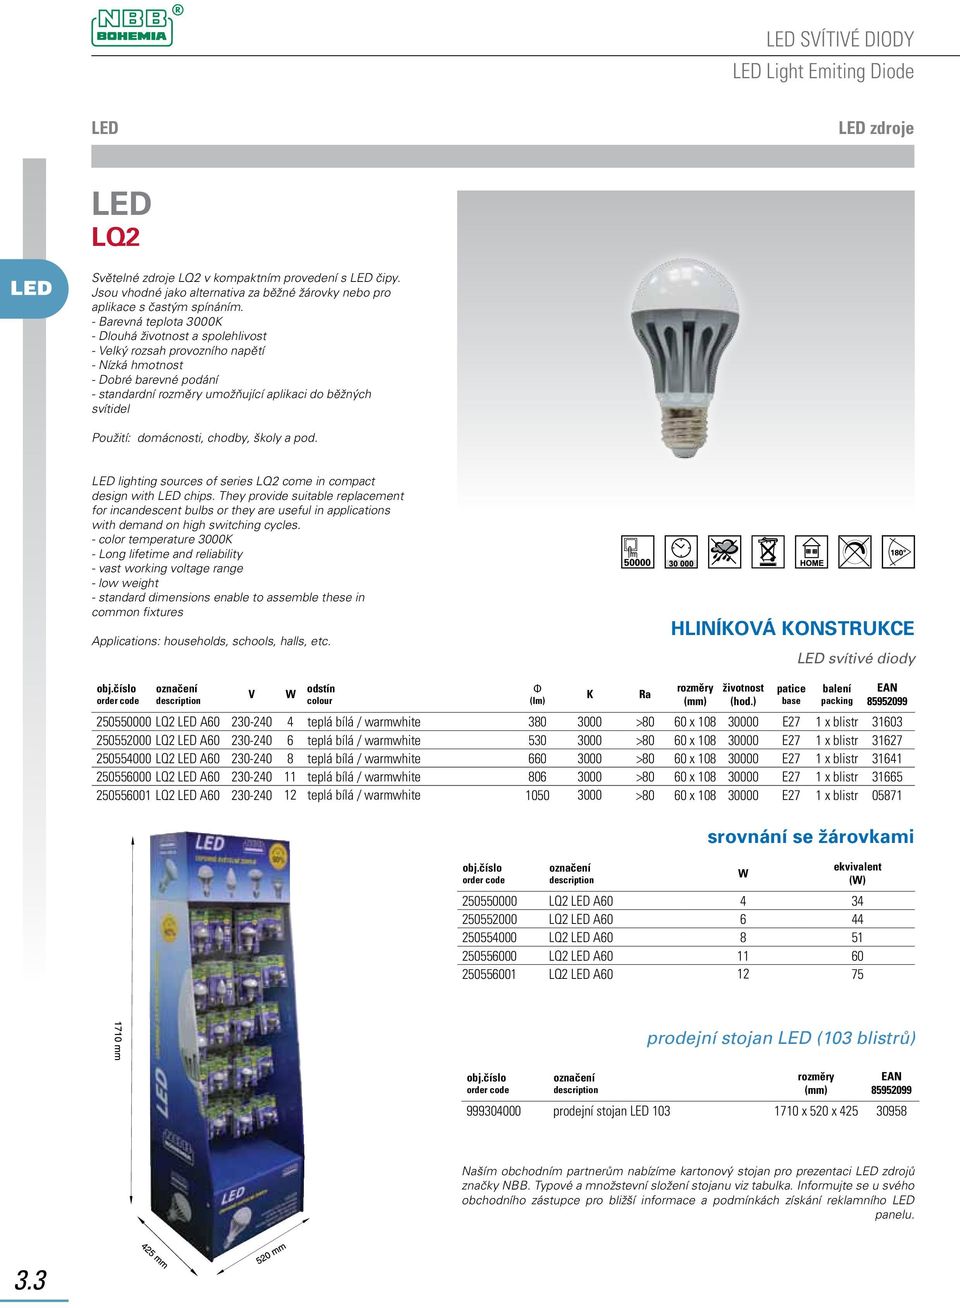 chodby, školy a pod. lighting sources of series LQ2 come in compact design with chips.